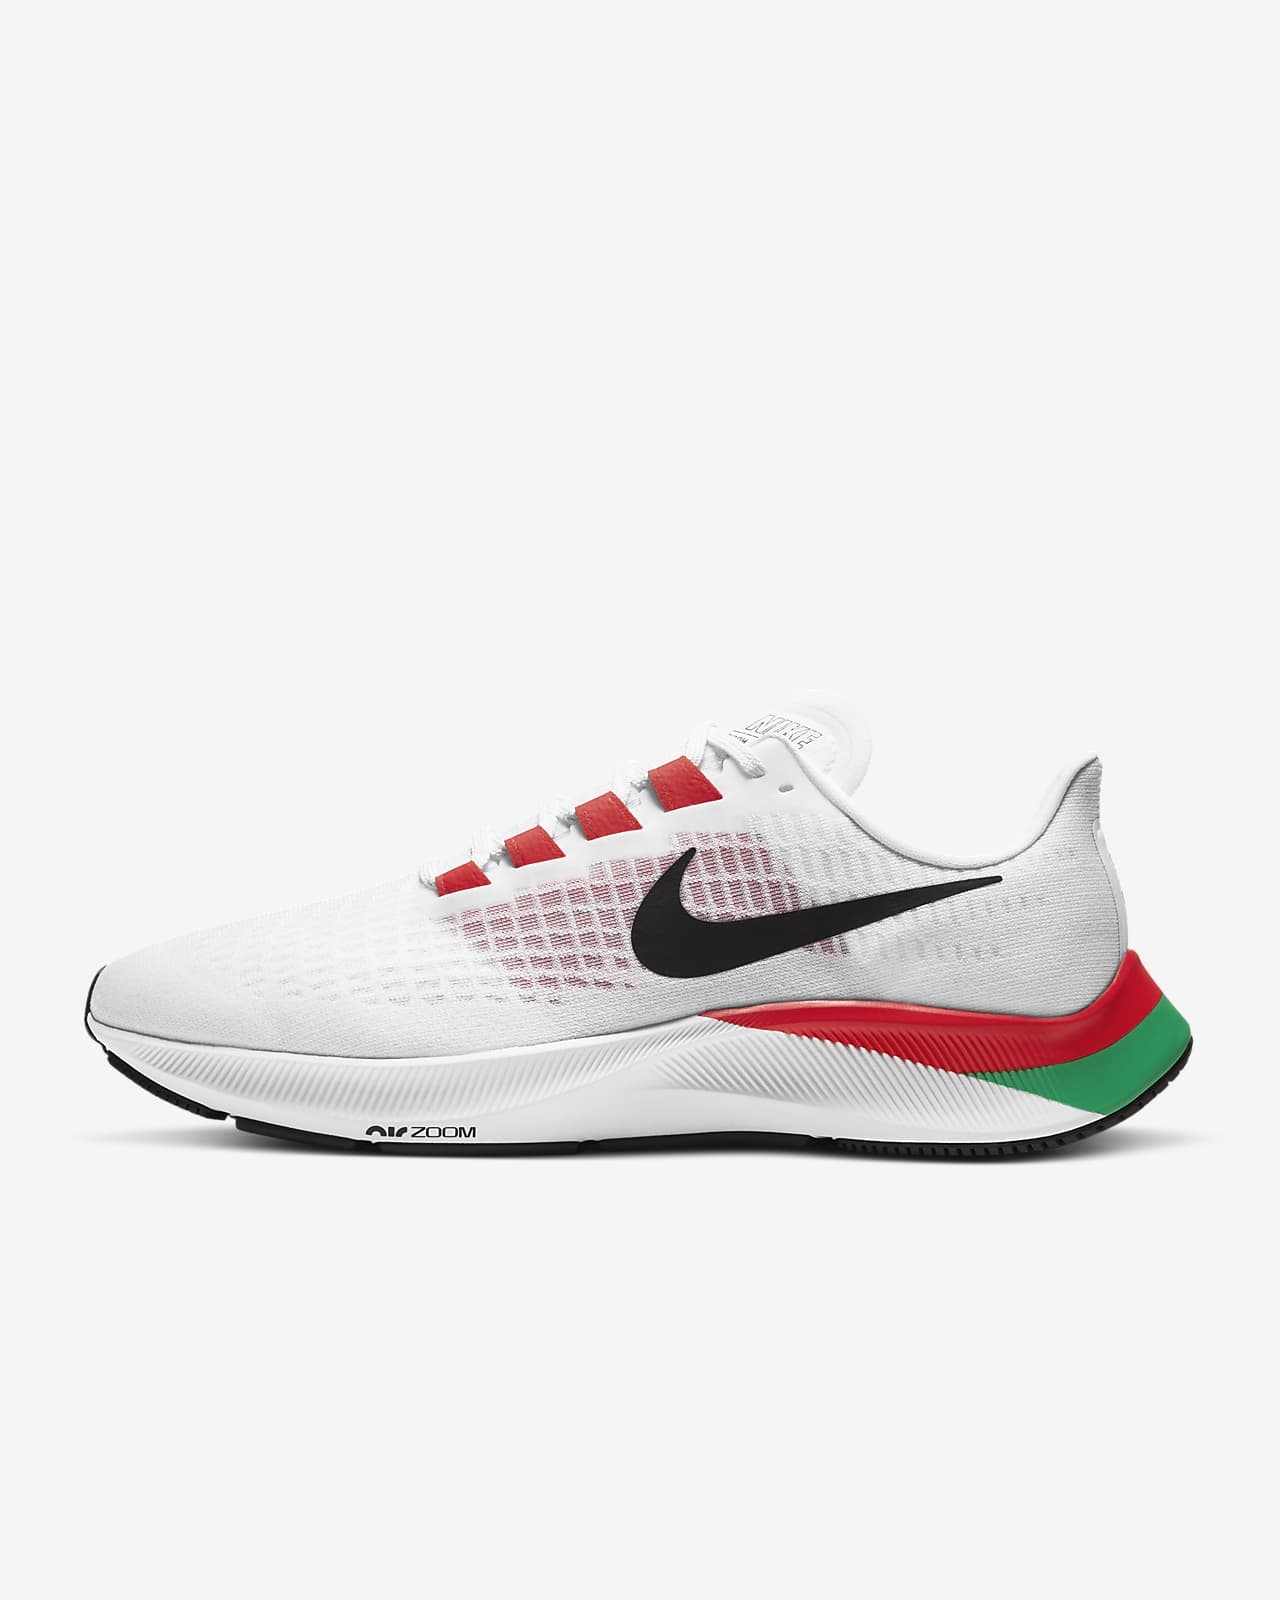 the nike air zoom